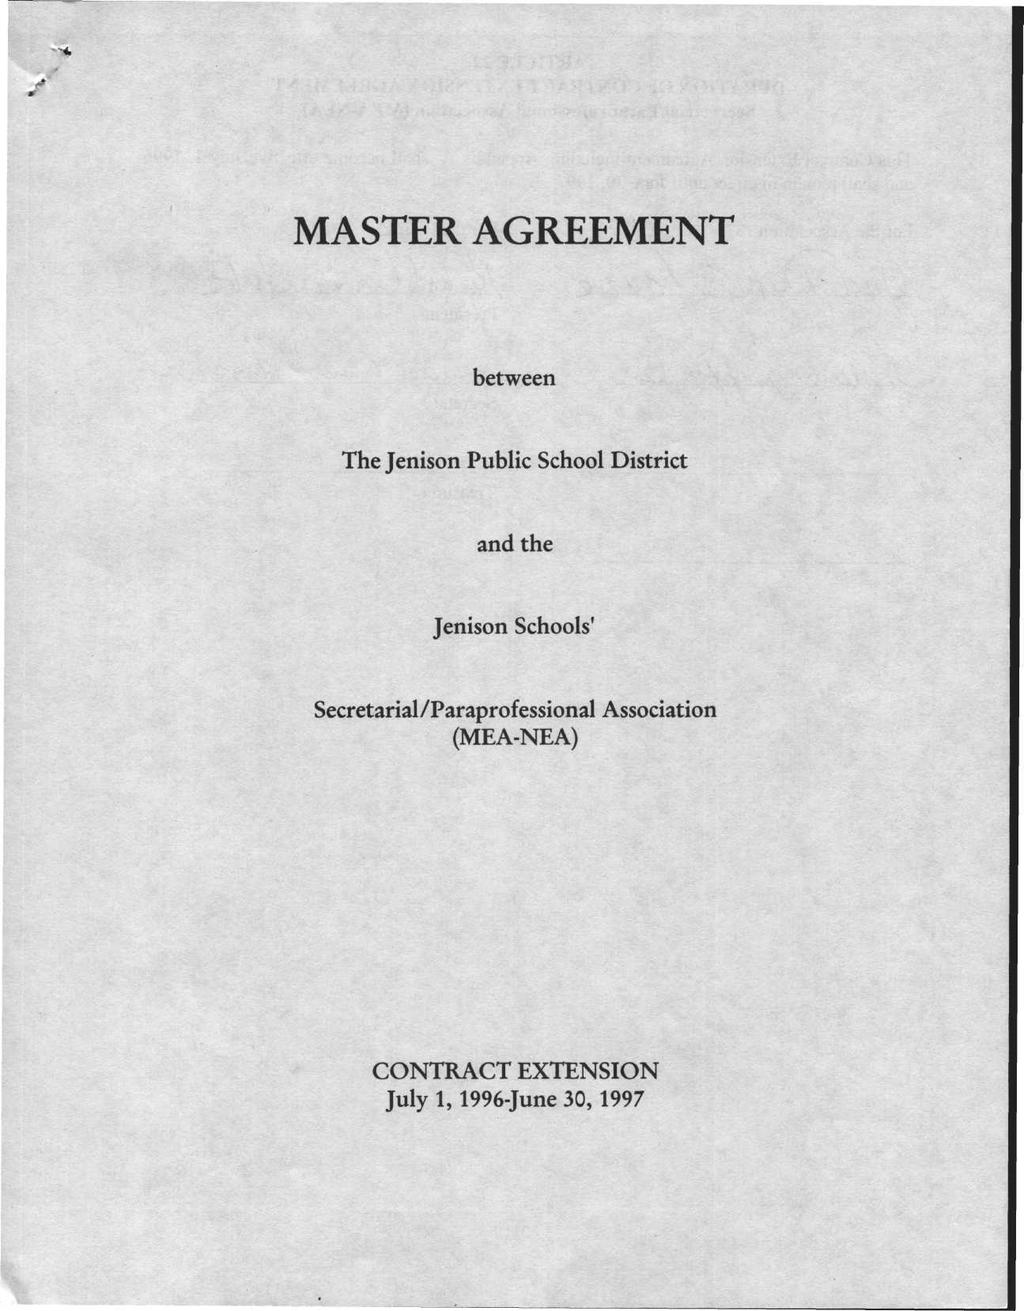 MASTER AGREEMENT between The Jenson Publc School Dstrct and the Jenson Schools'